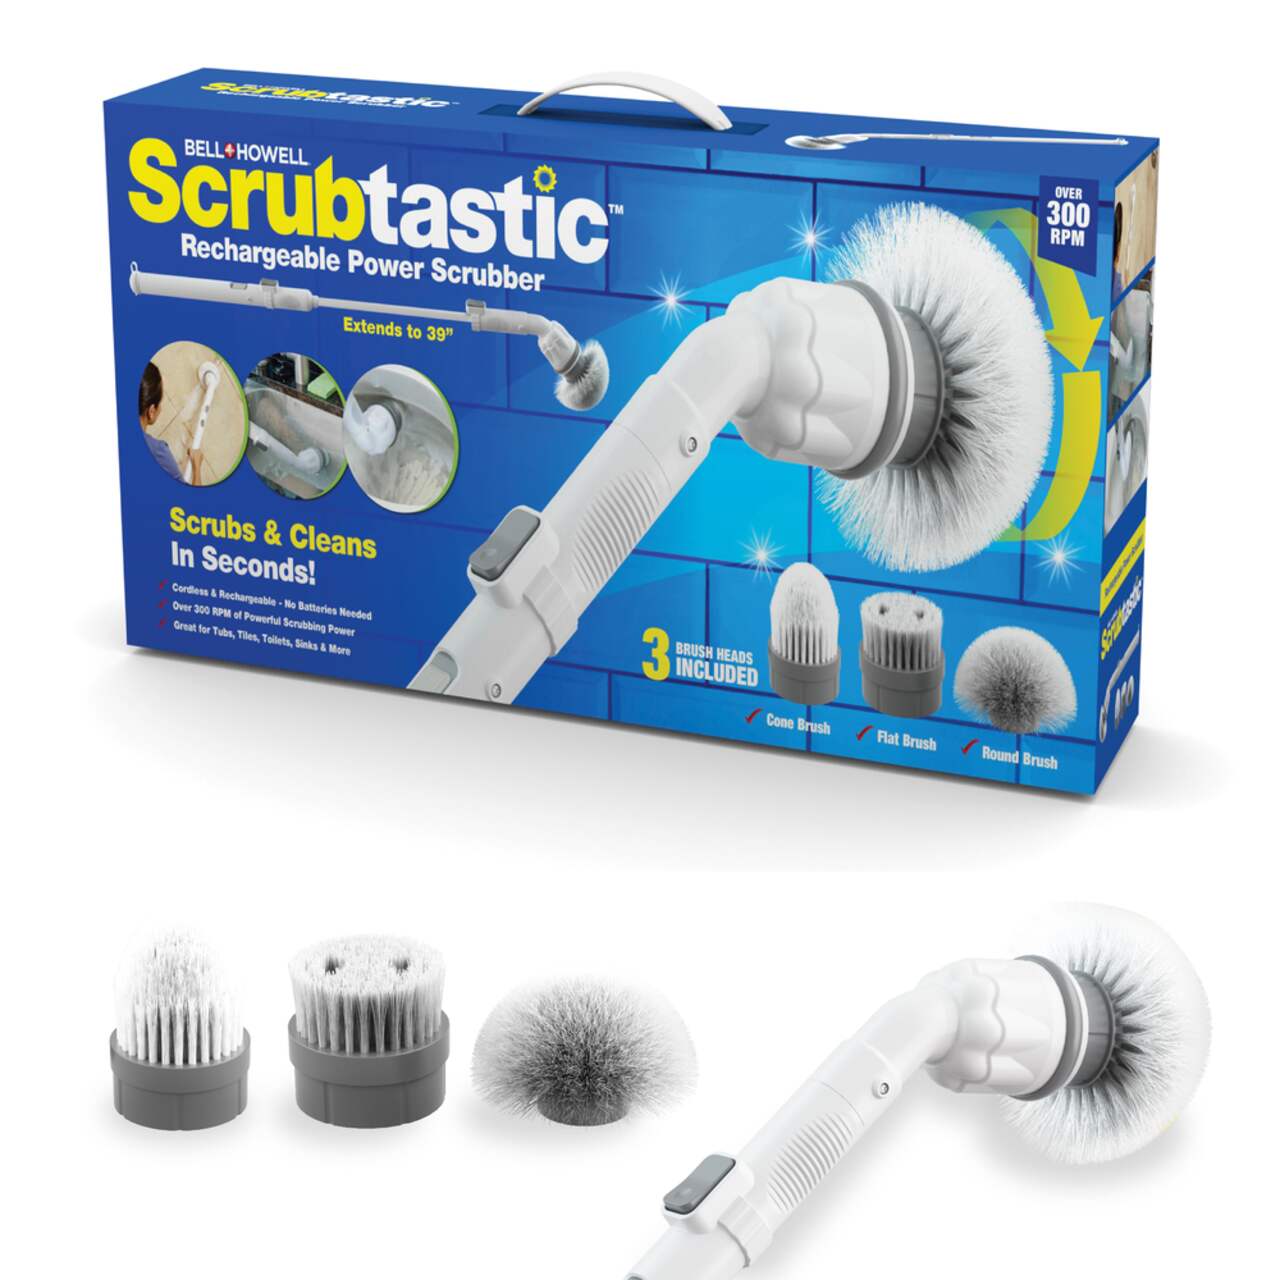 As Seen On TV Scrubtastic Rechargeable Power Scrubber Brush